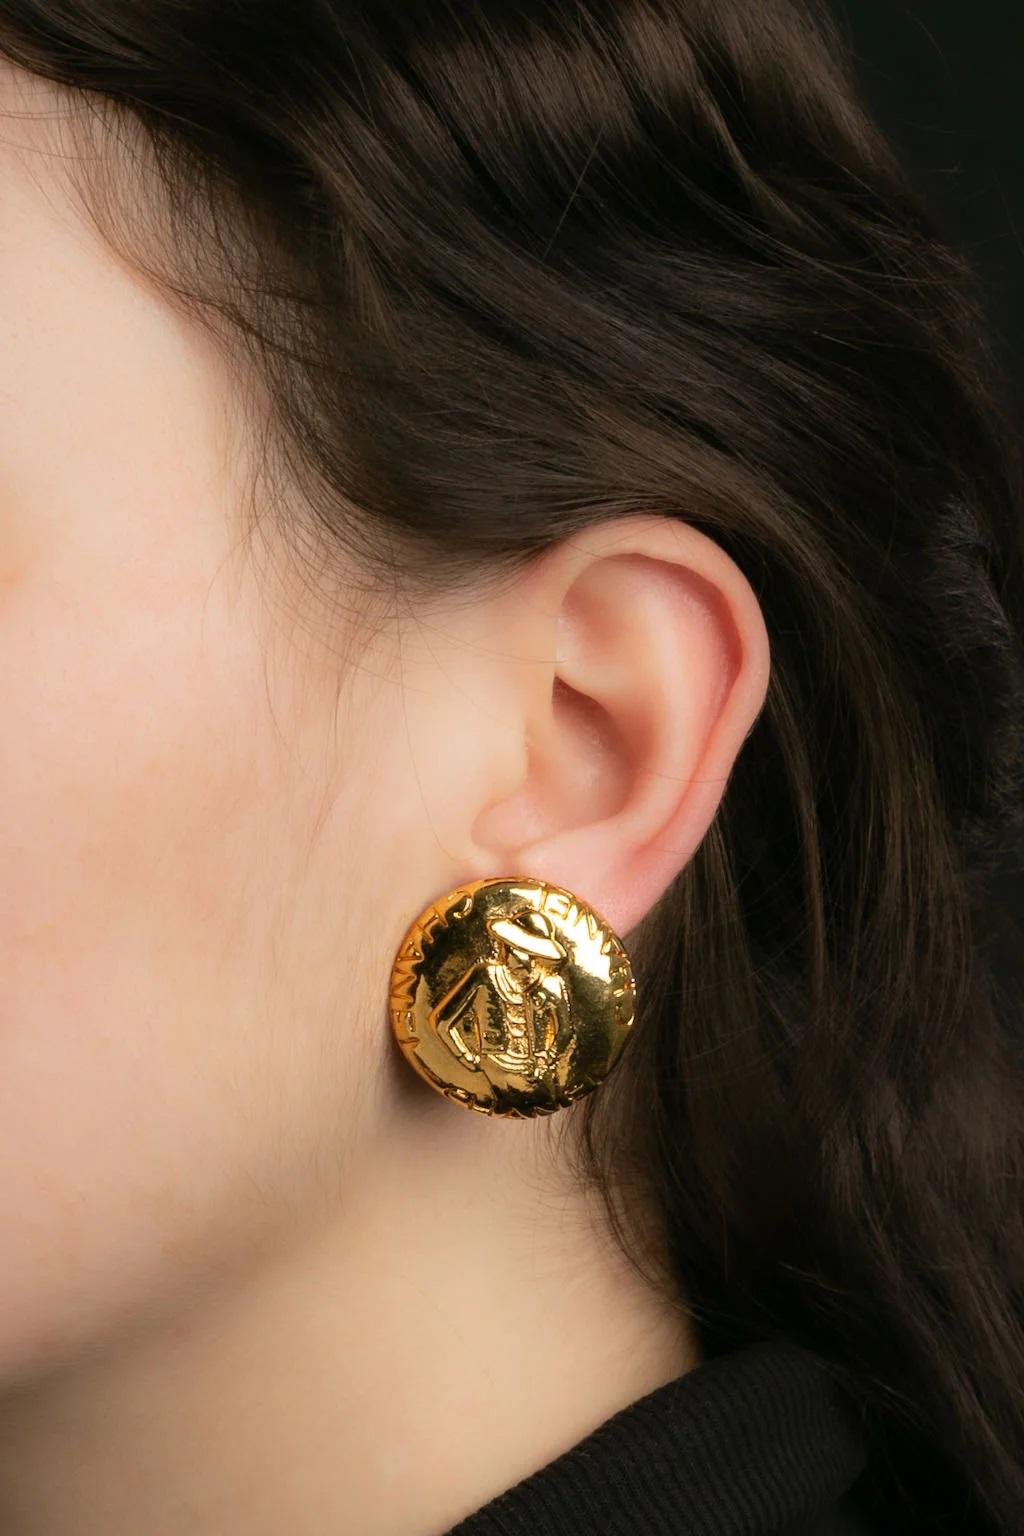 Chanel - (Made in France) Gold metal clip earrings featuring the silhouette of Coco Chanel.

Additional information:
Dimensions: Ø 2.8 cm

Condition: 
Very good condition

Seller Ref number: BOB147